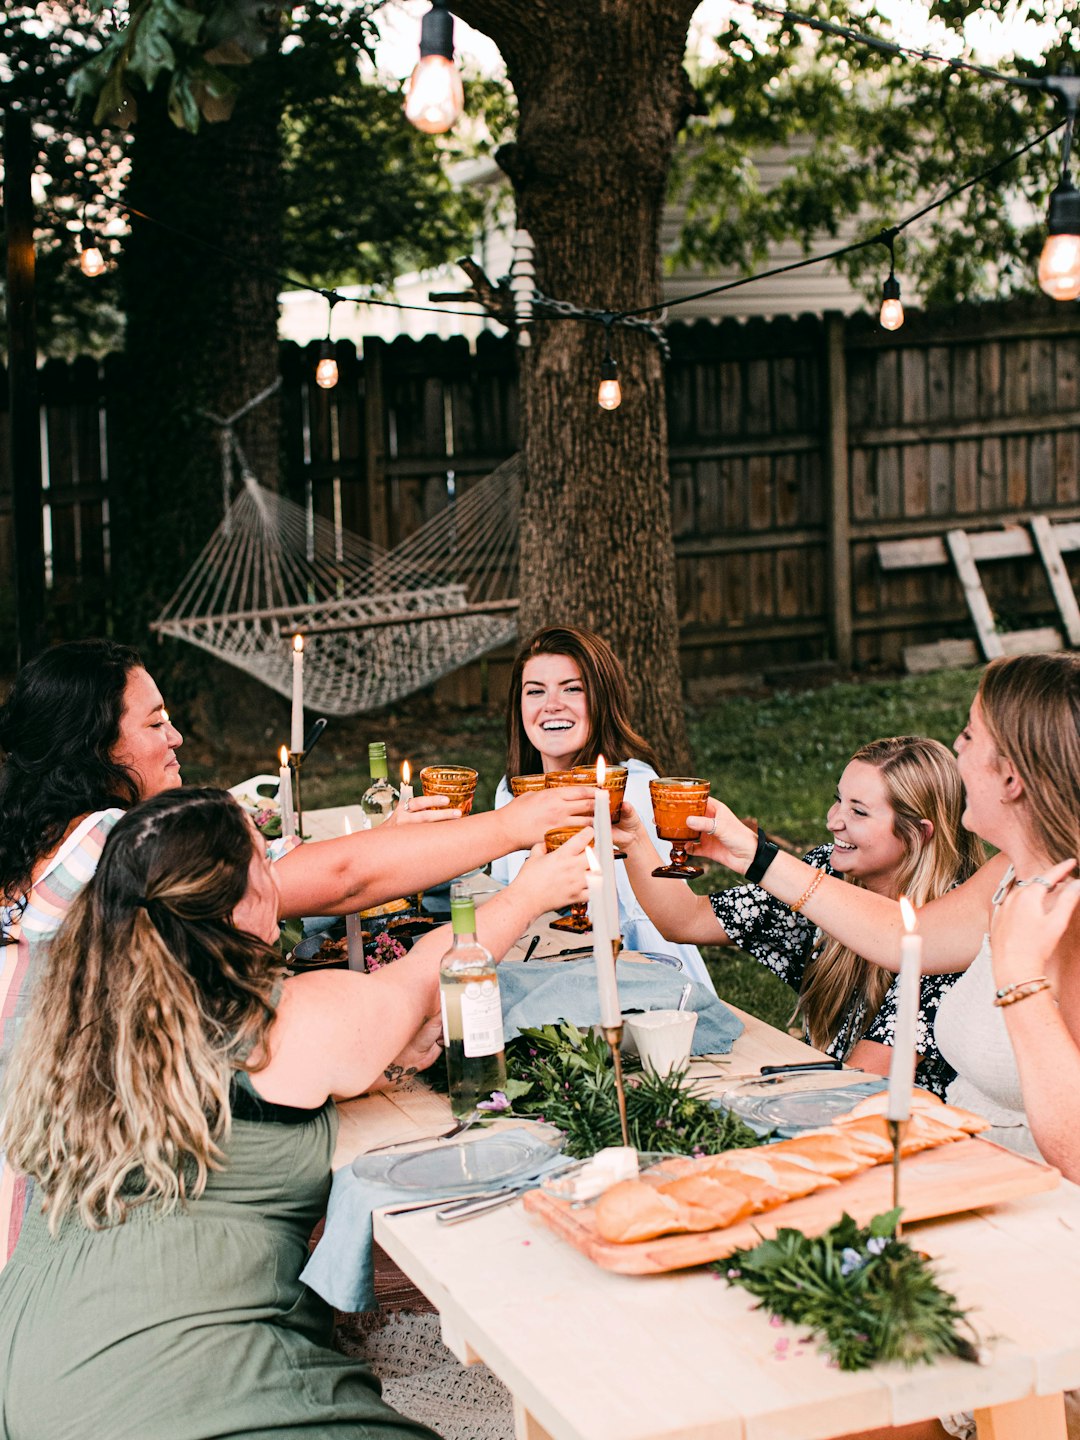 100+ Dinner Party Pictures | Download Free Images on Unsplash